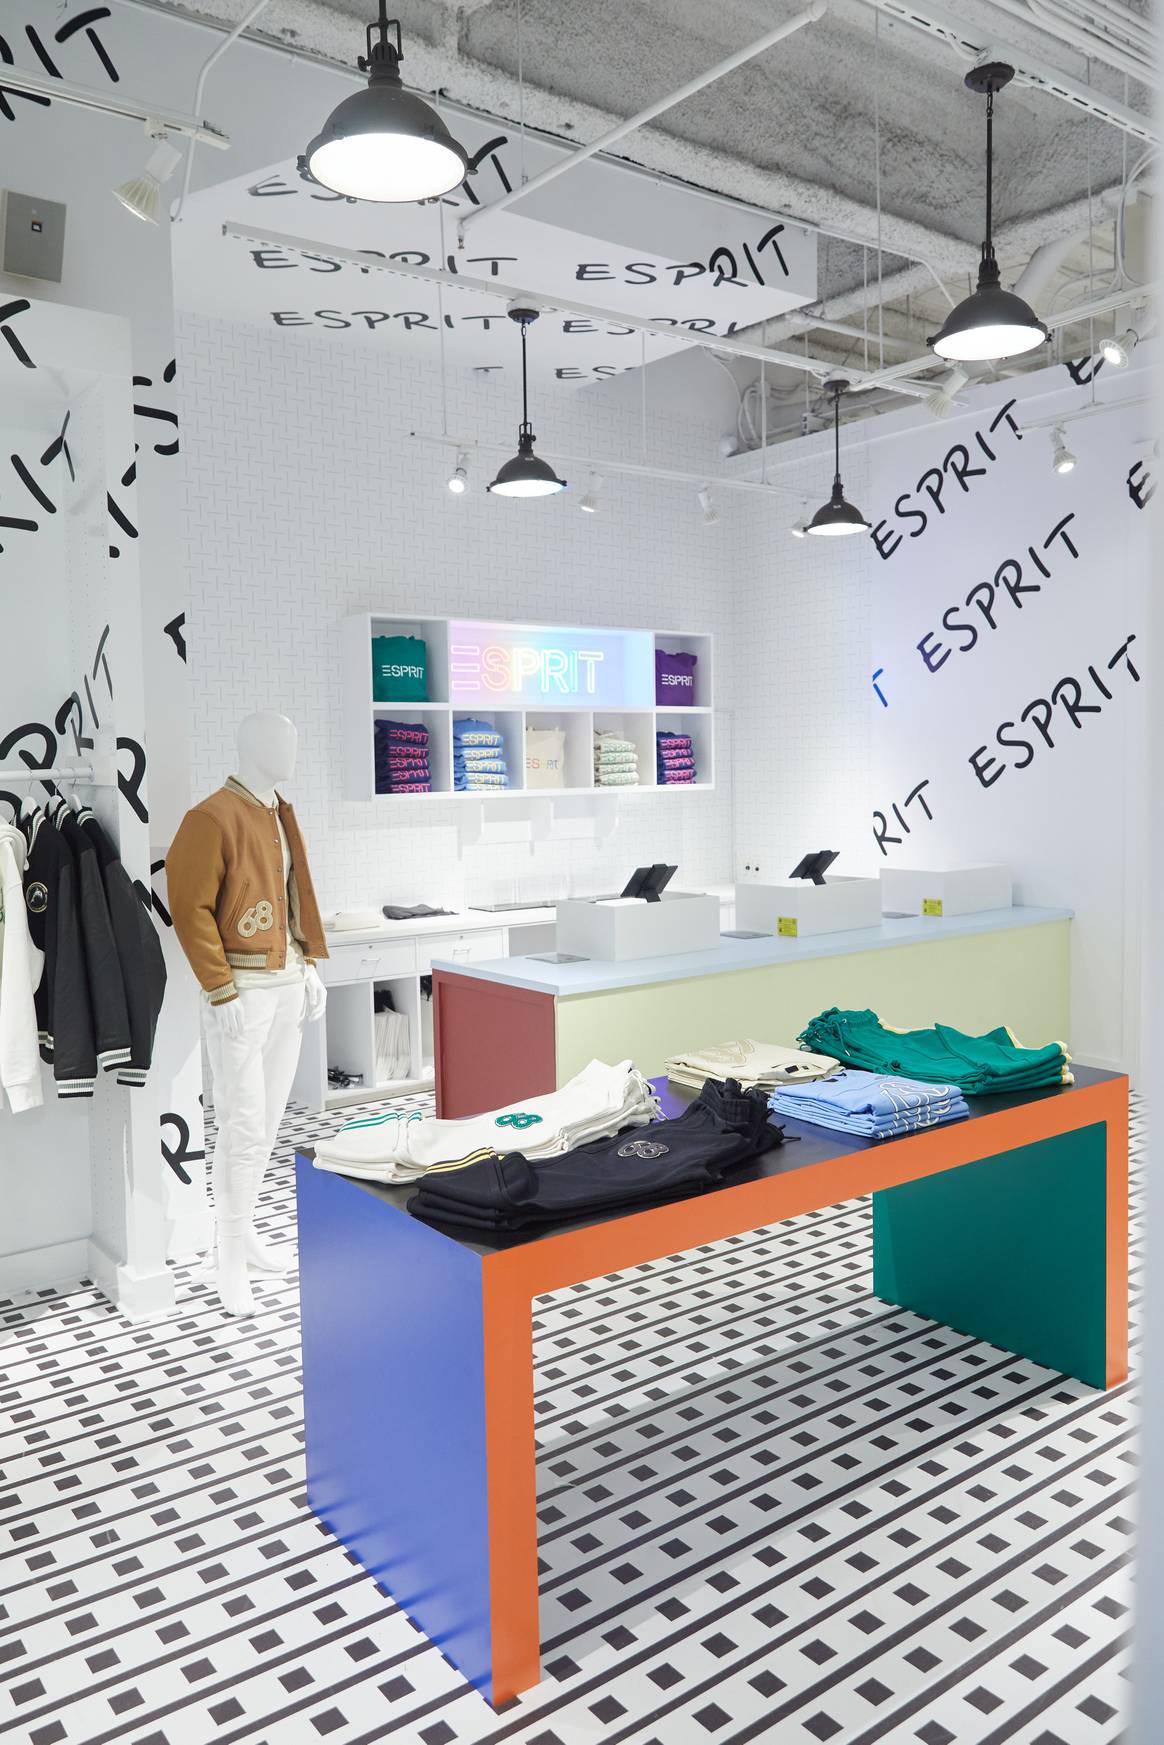 Image: Esprit; The Grove in Los Angeles pop-up